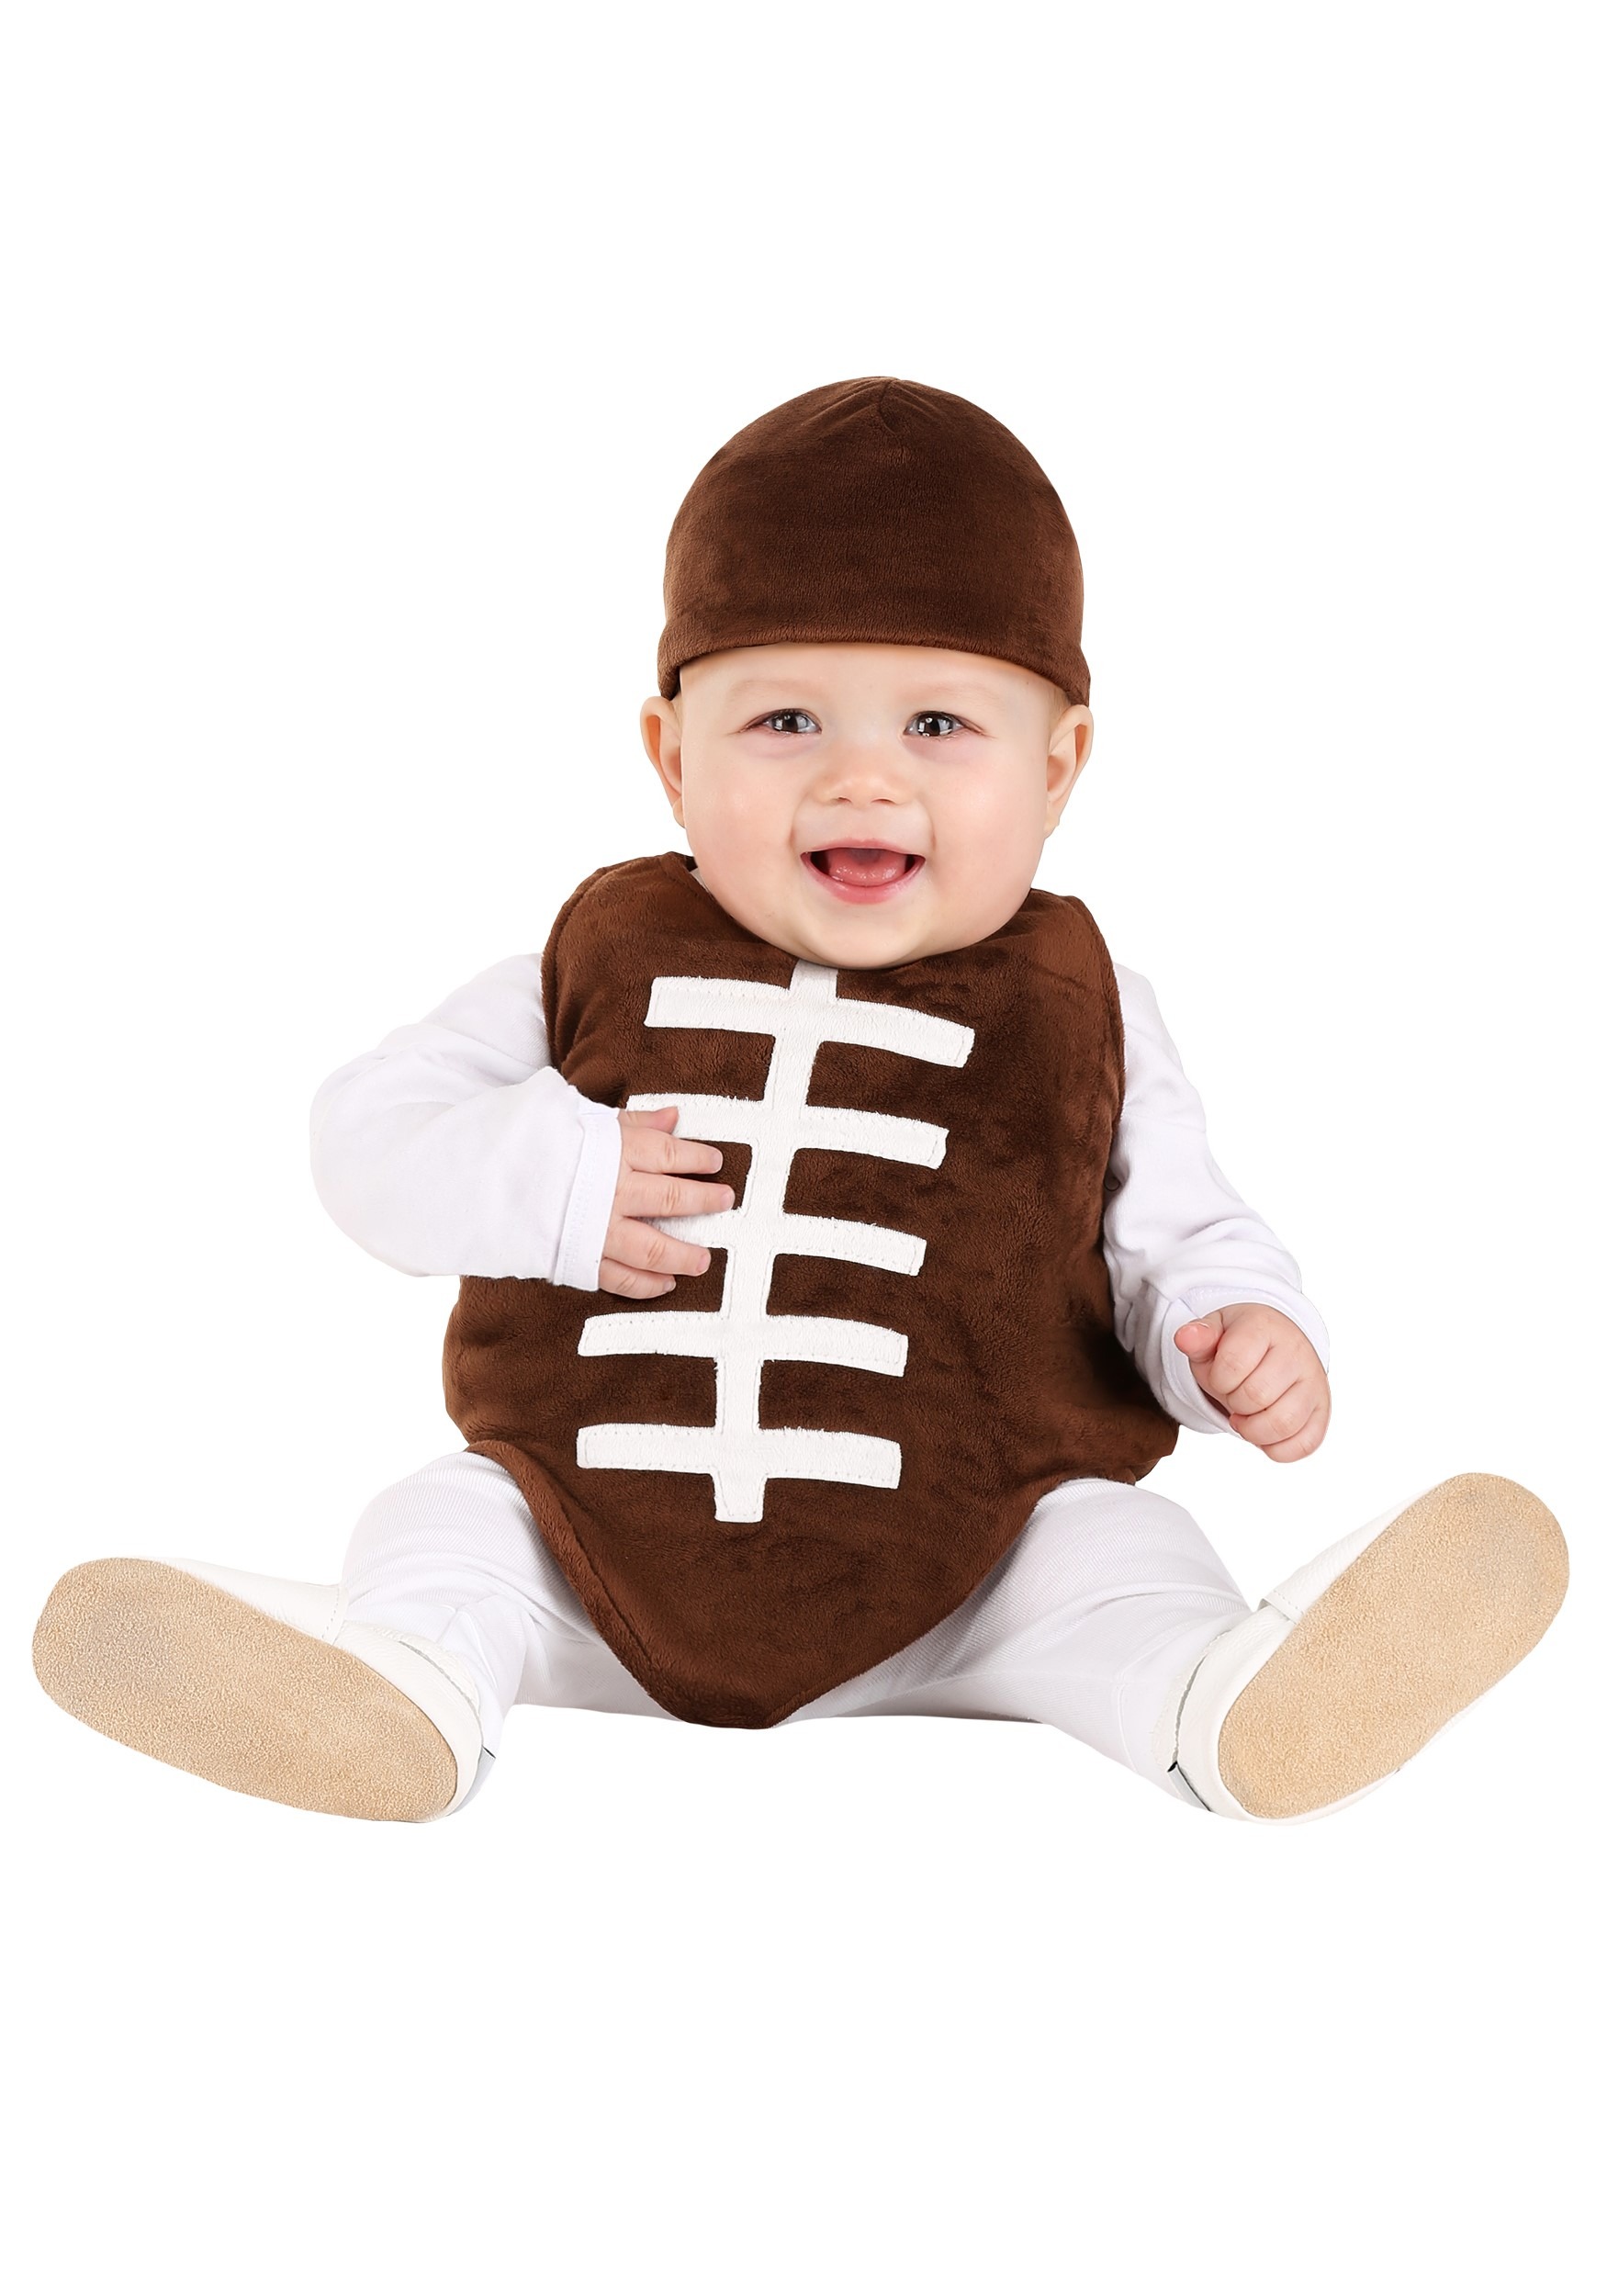 Amosfun Adorable Baby Photography Soccer Player Clothing Infant Costume Suit Party Photo Props 